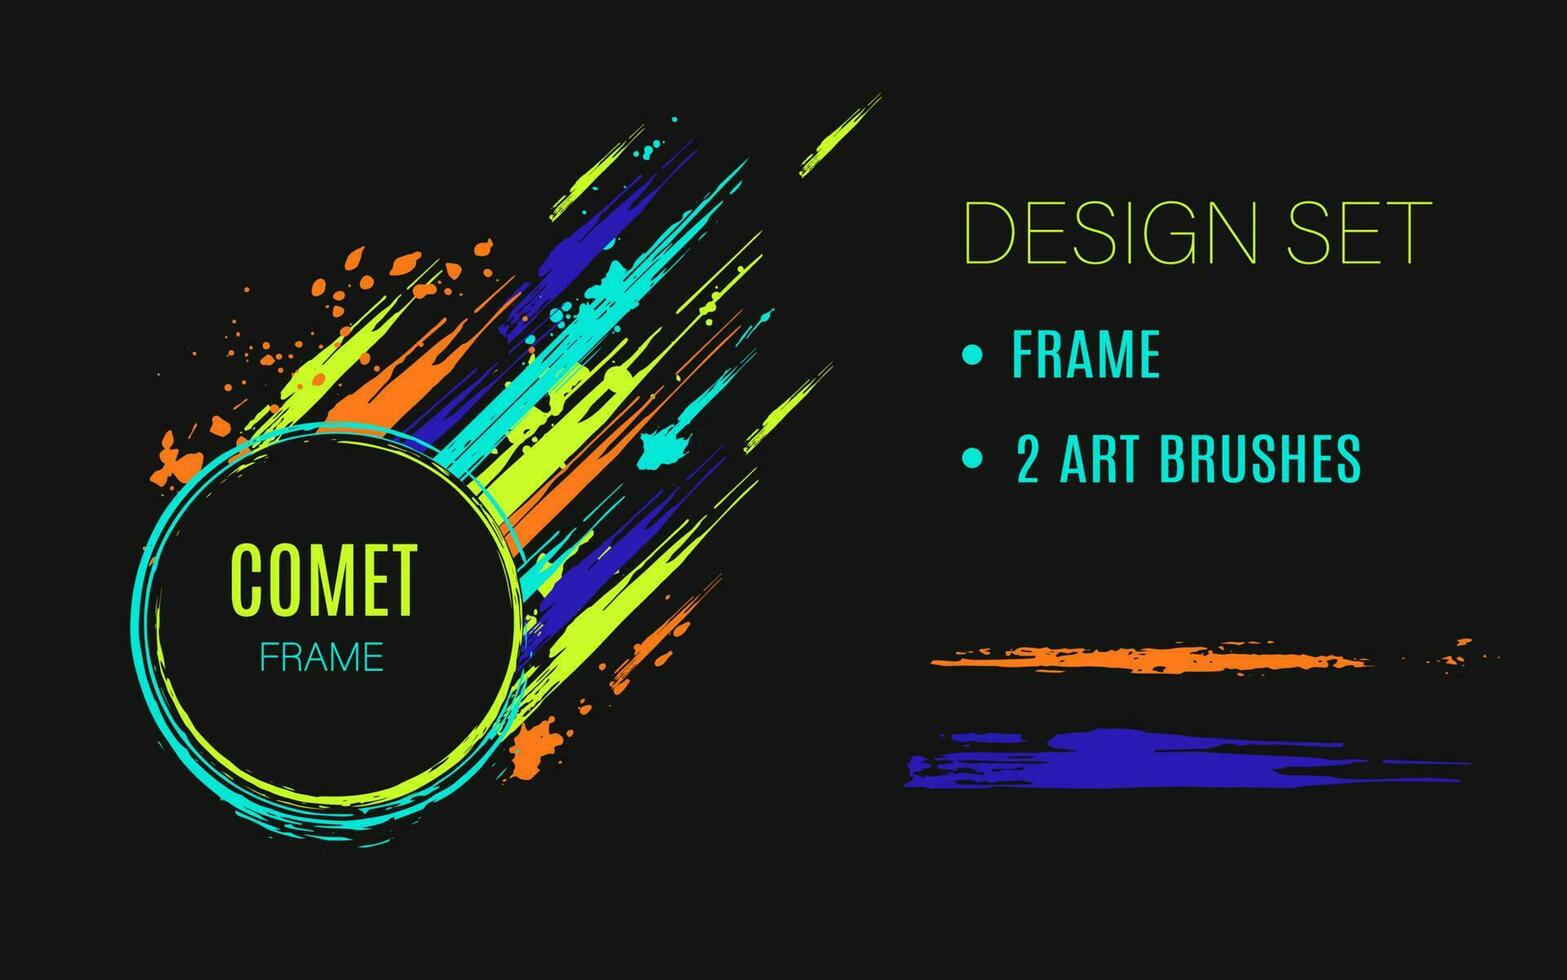 Set of design elements, circular frame like comet, grunge art brushes Dark circle on background with paint brush strokes, dynamic glowing lines, spattered paint of neon bright colors Abstract clip art vector